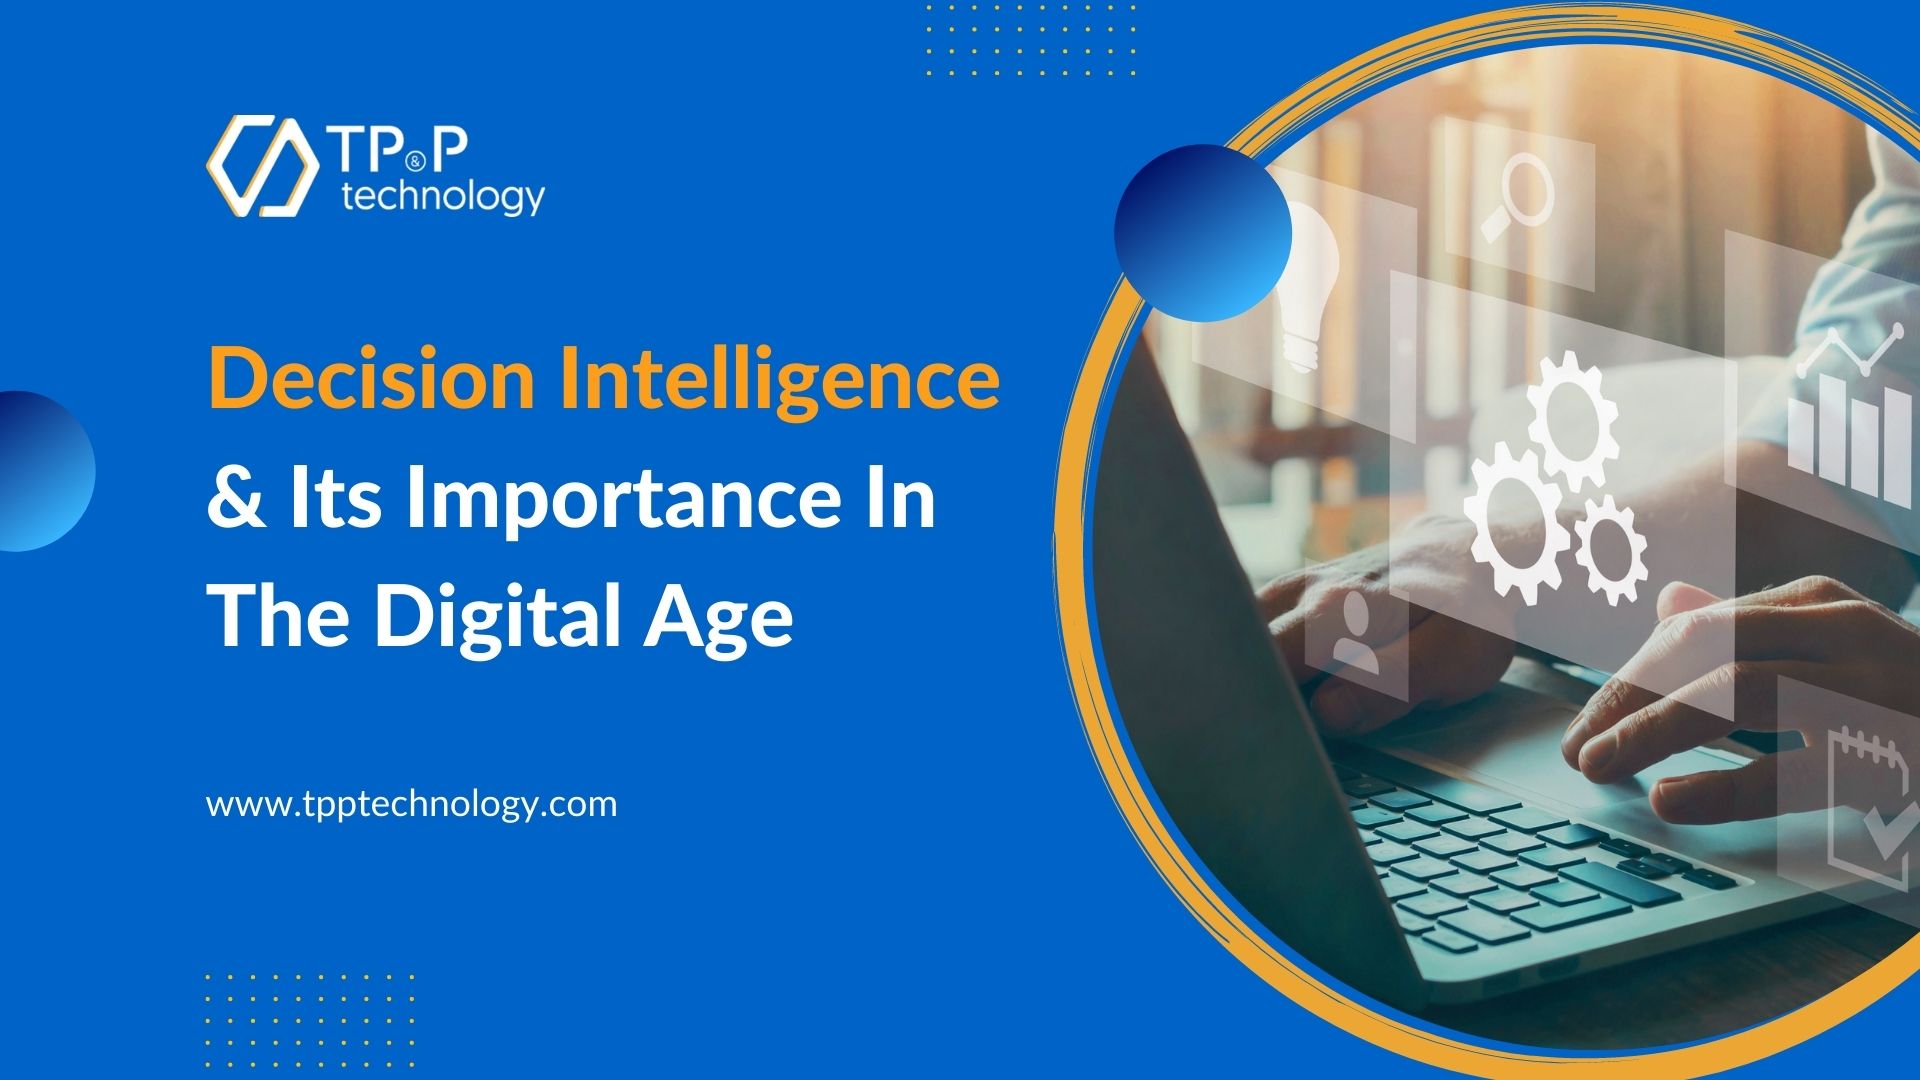 Decision Intelligence & Its Importance In The Digital Age